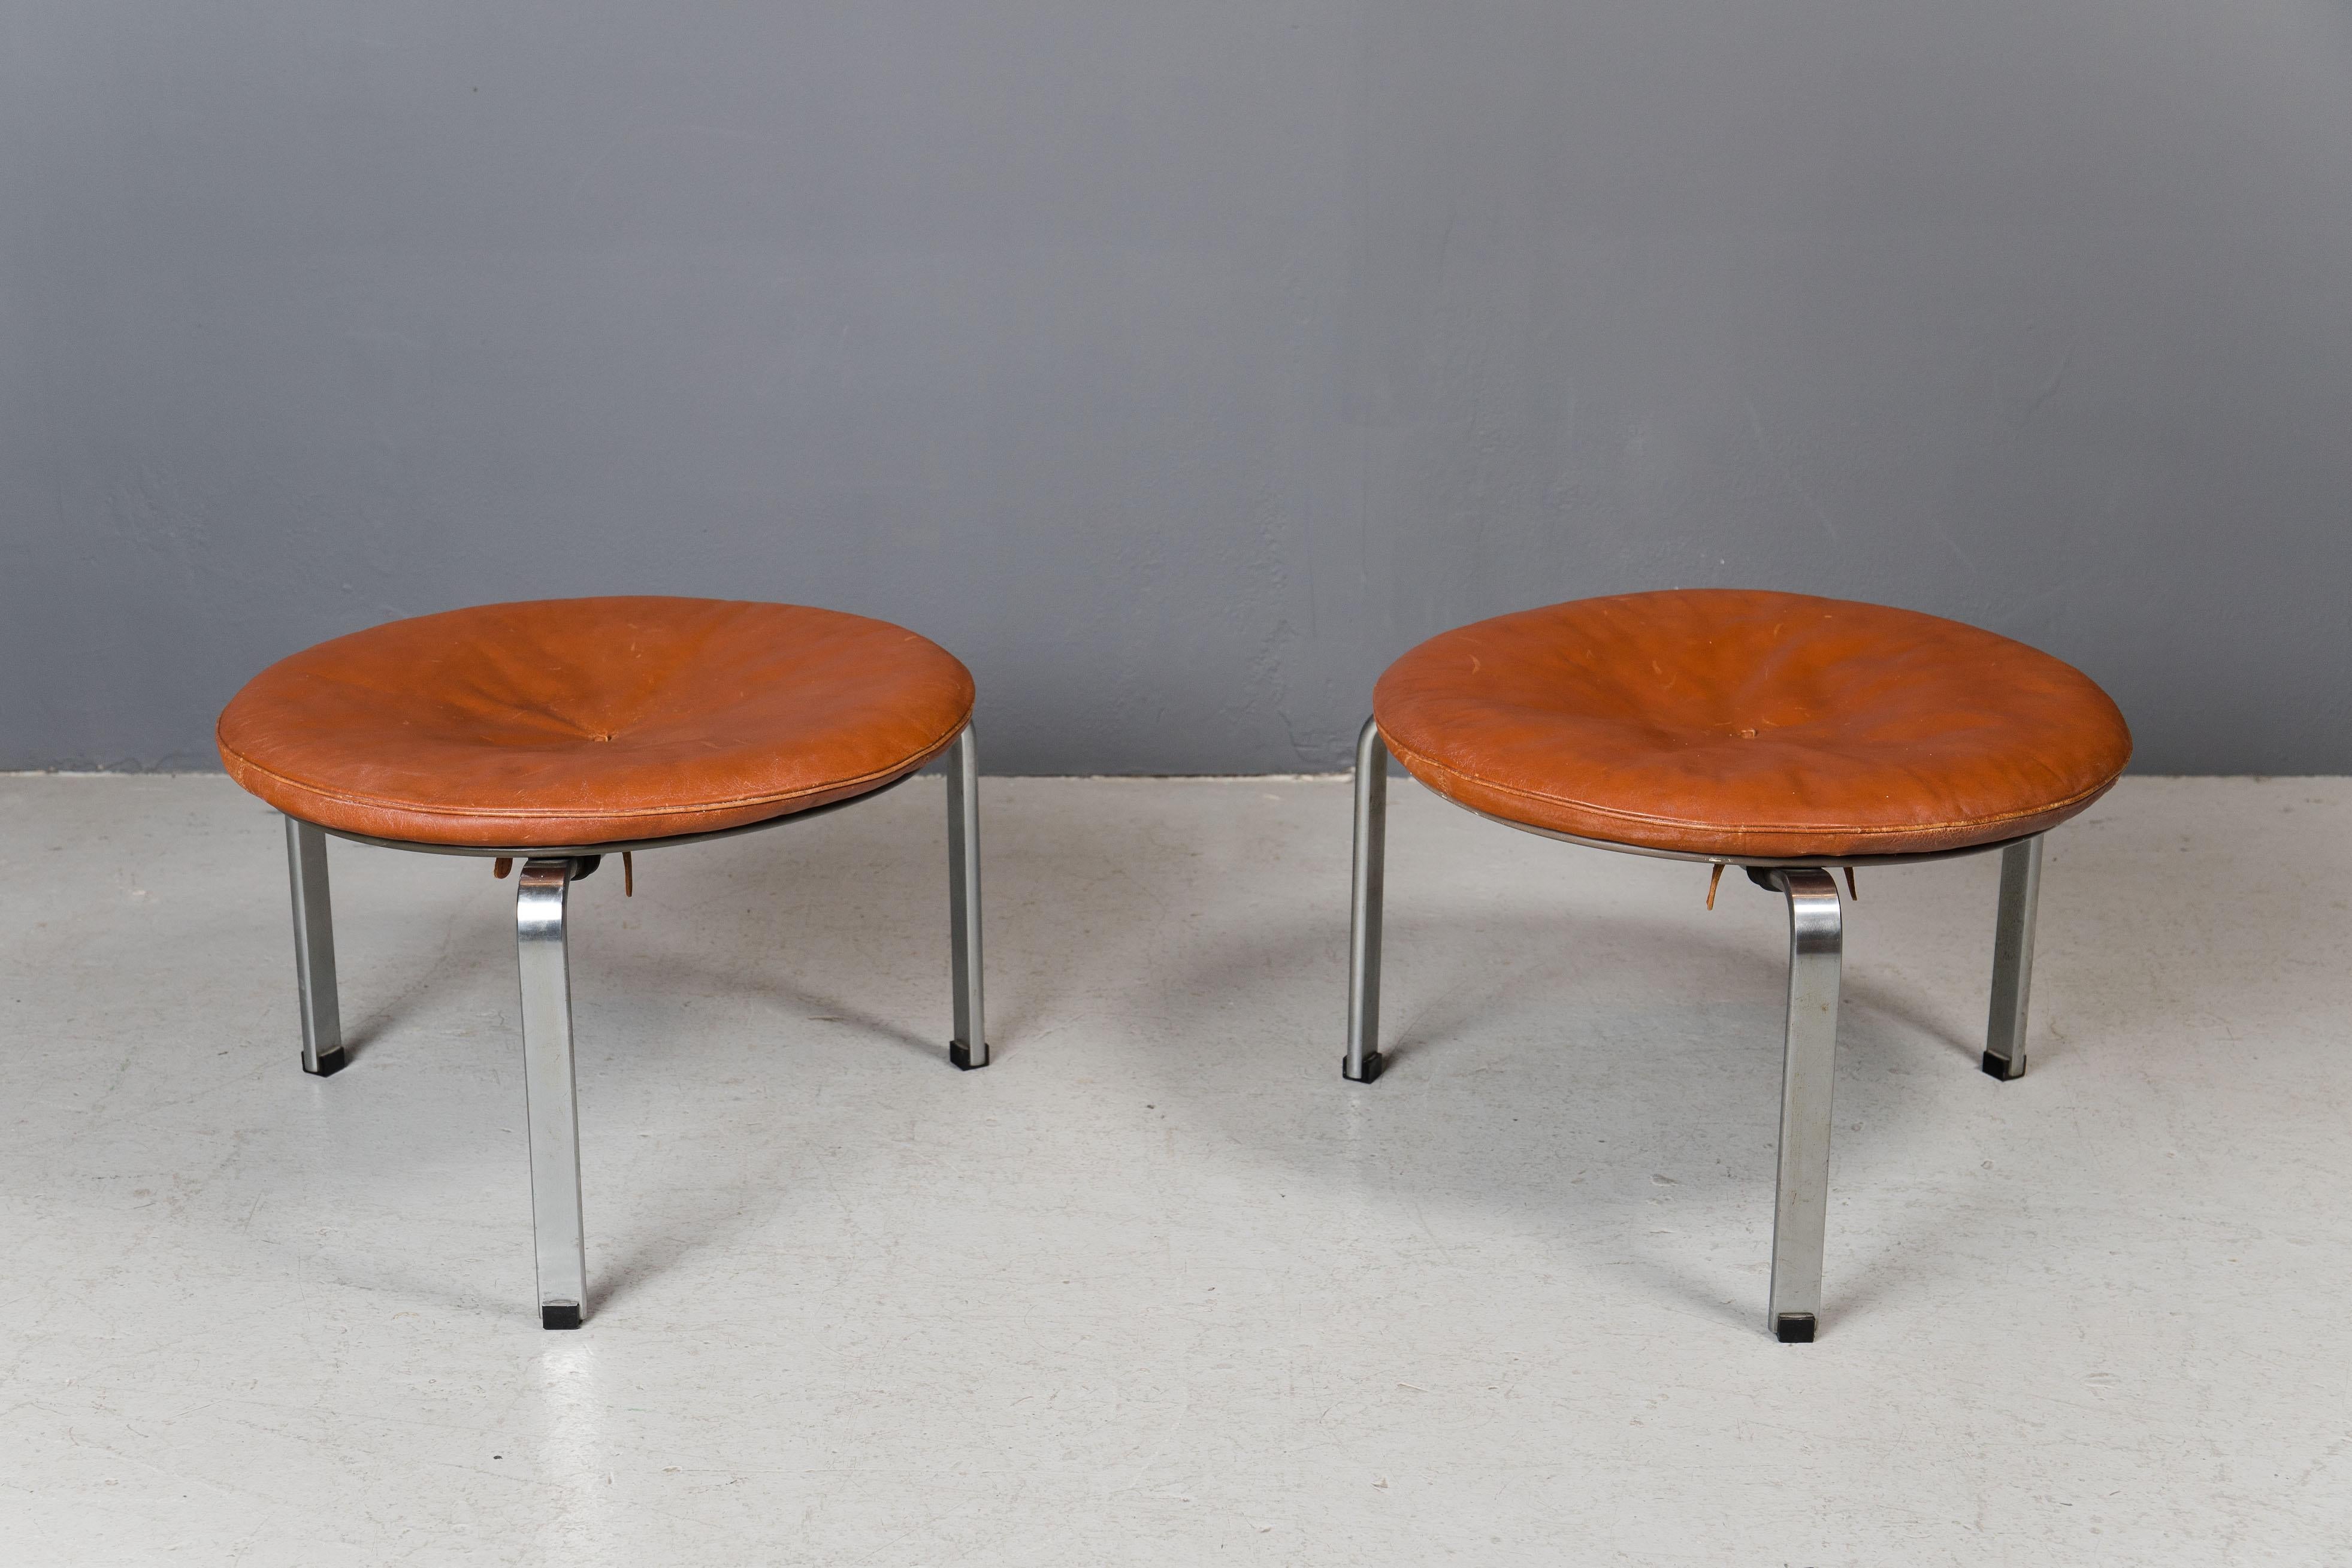 Pair of PK 33 stools in patinated natural leather on chromed steel frame, created by Poul Kjaerholm for E. Kold Christensen, 1950s.